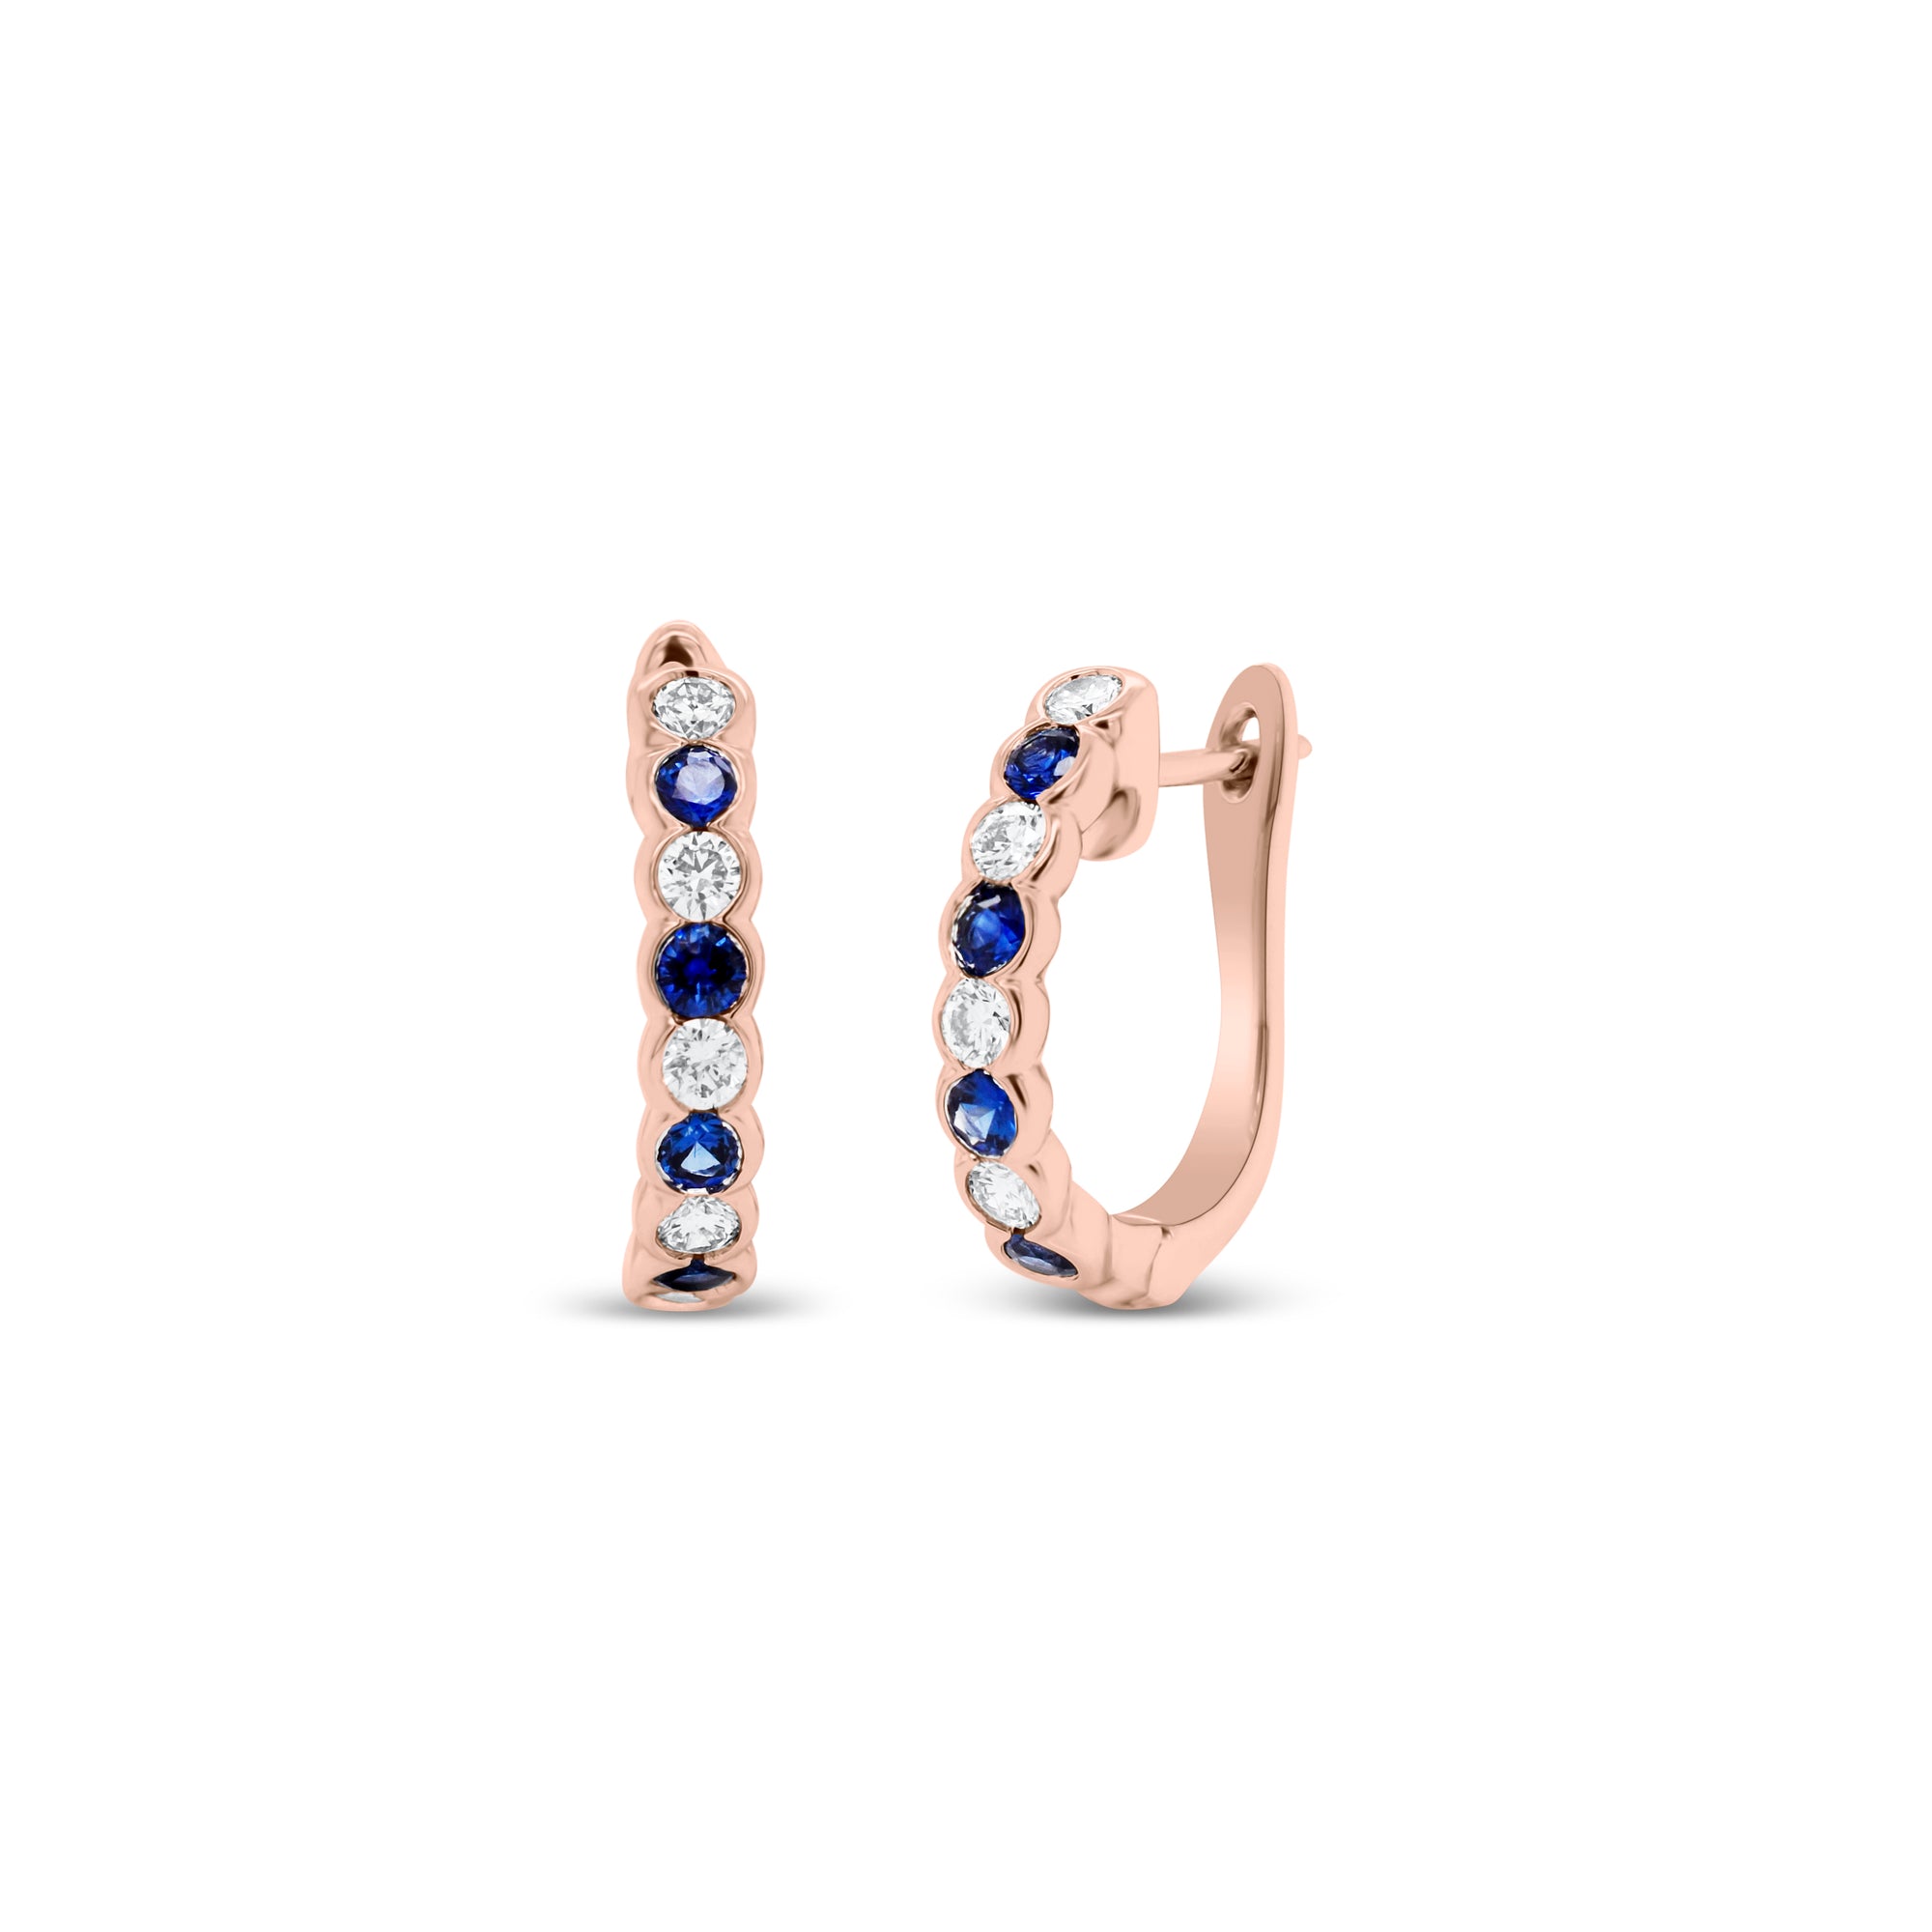 Sapphire & Diamond hoop earrings - 18K gold weighing 3.56 grams  - 8 round diamonds totaling 0.34 carats  - 8 sapphires totaling 0.41 carats